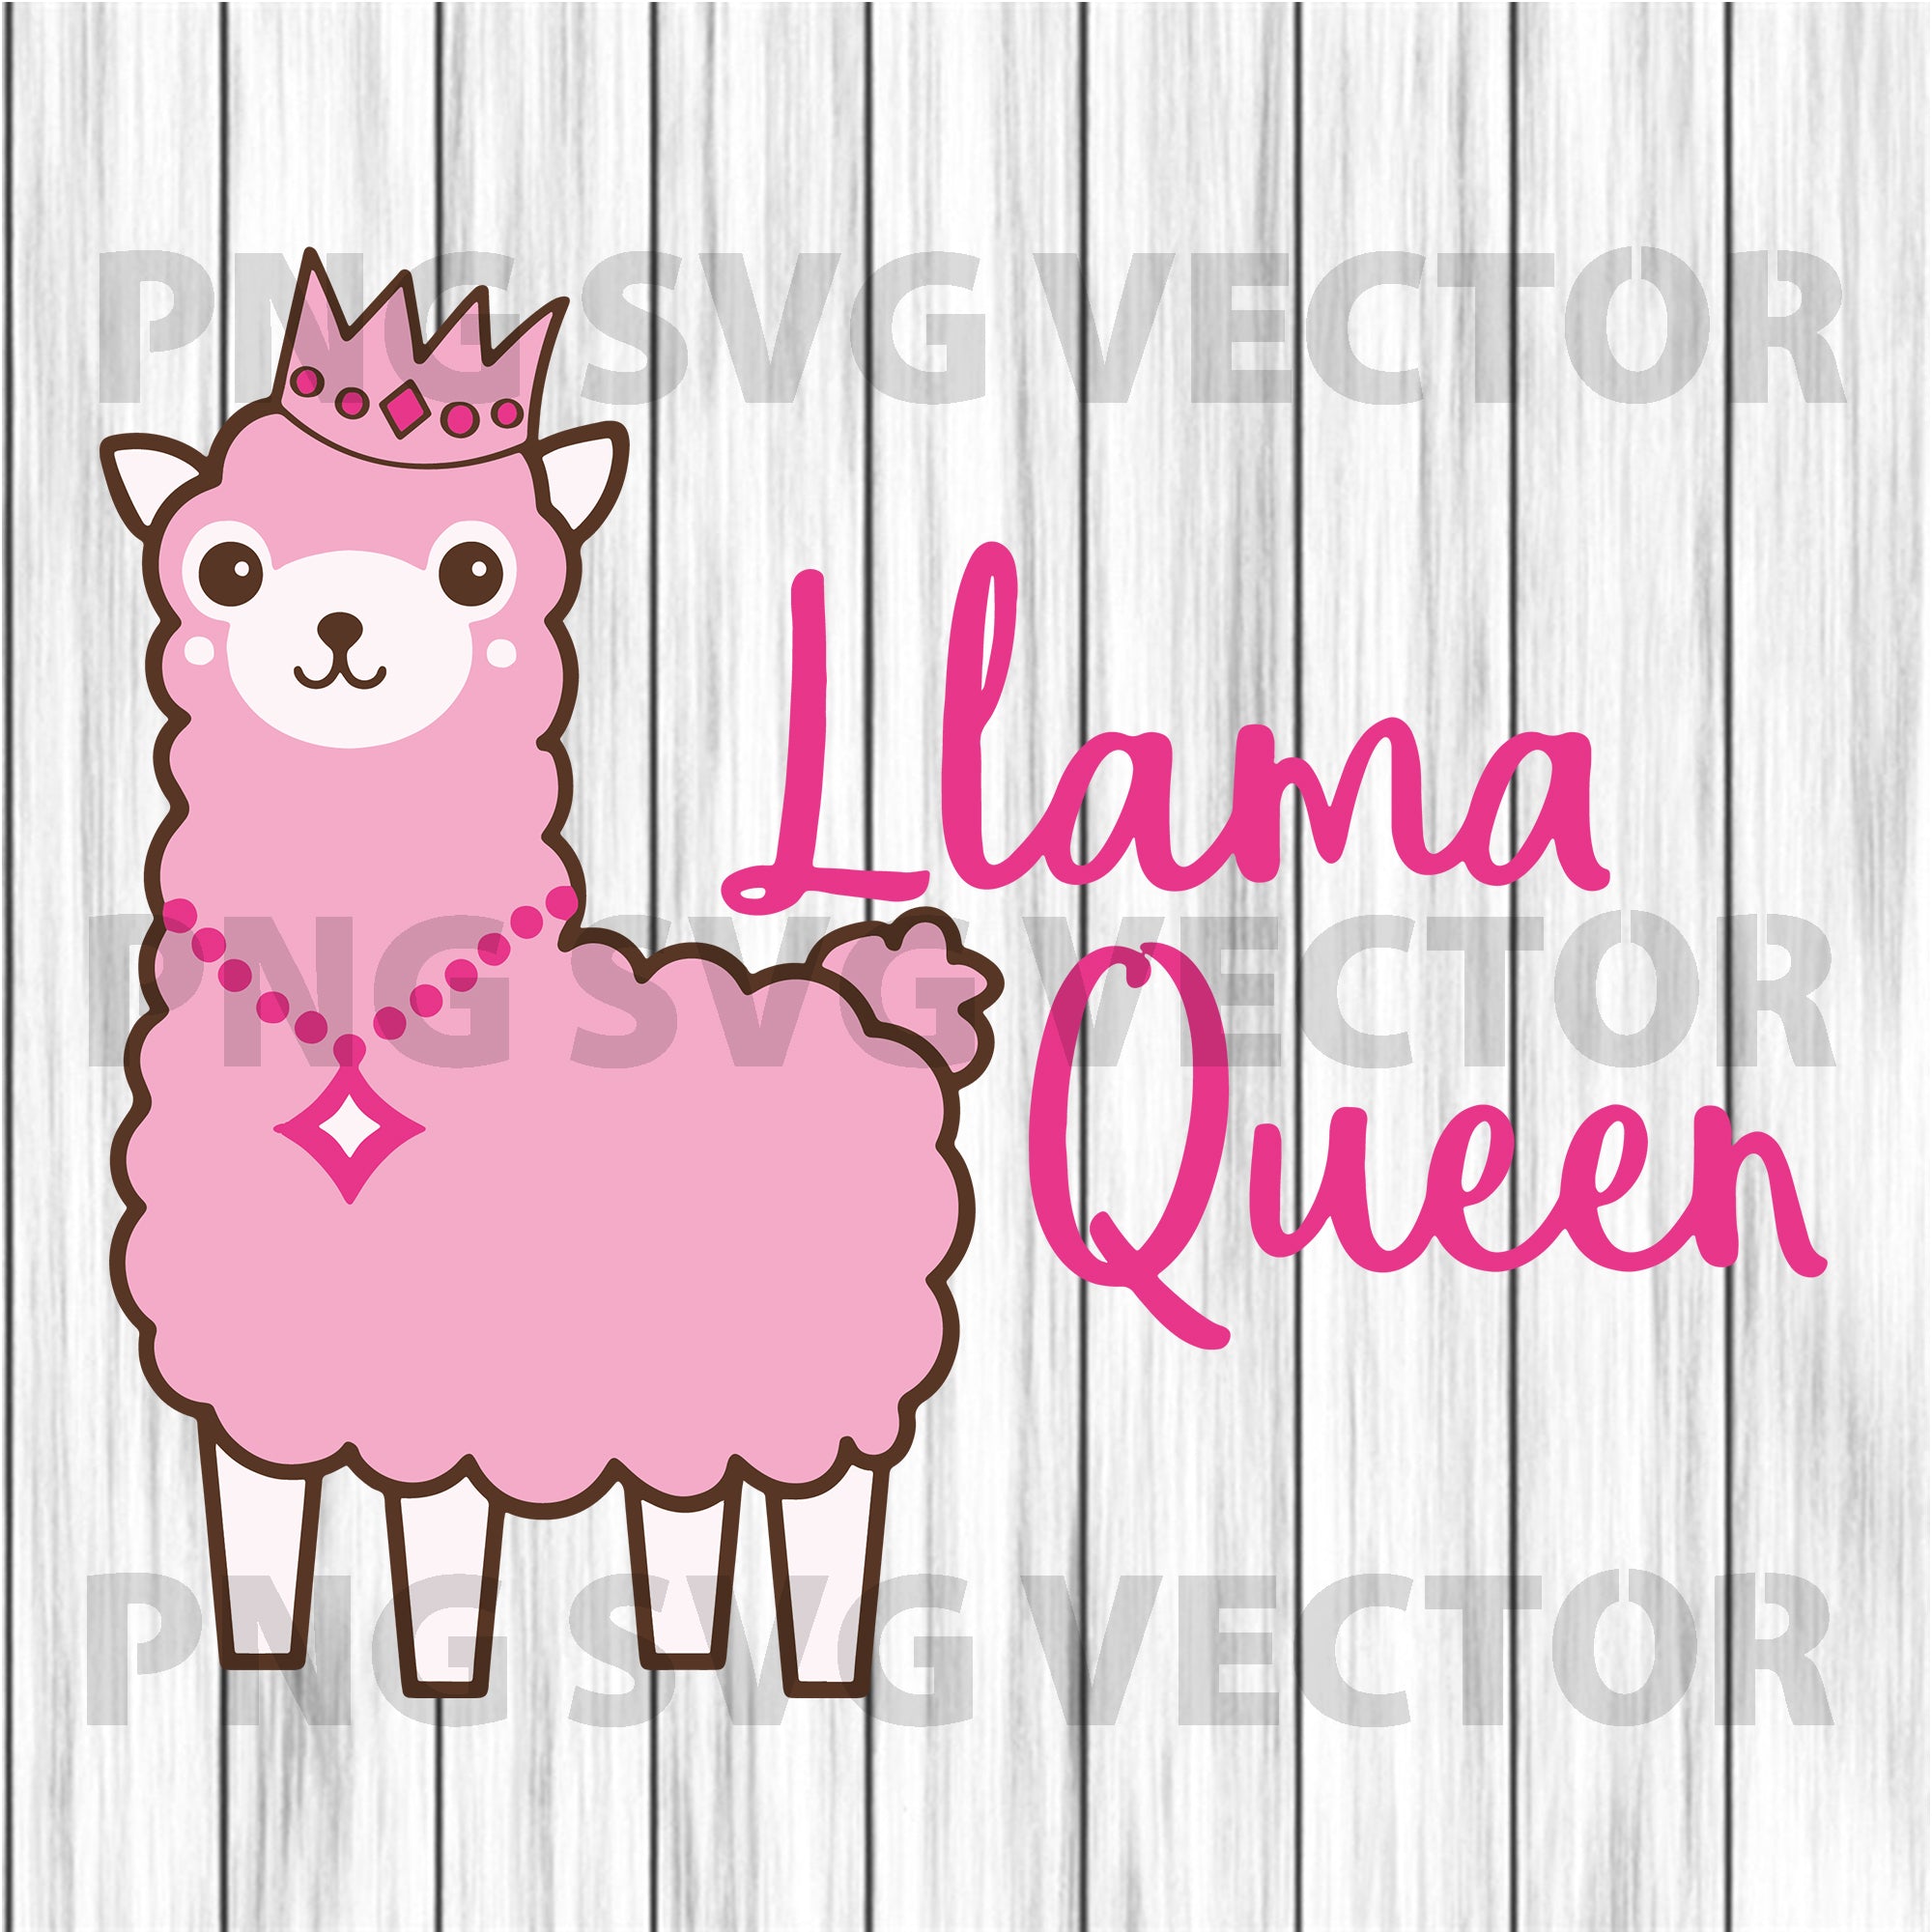 Download Llama Queen Svg Llama Files For Cricut Svg Dxf Eps Png Instant Do Beetanosvg Scalable Vector Graphics